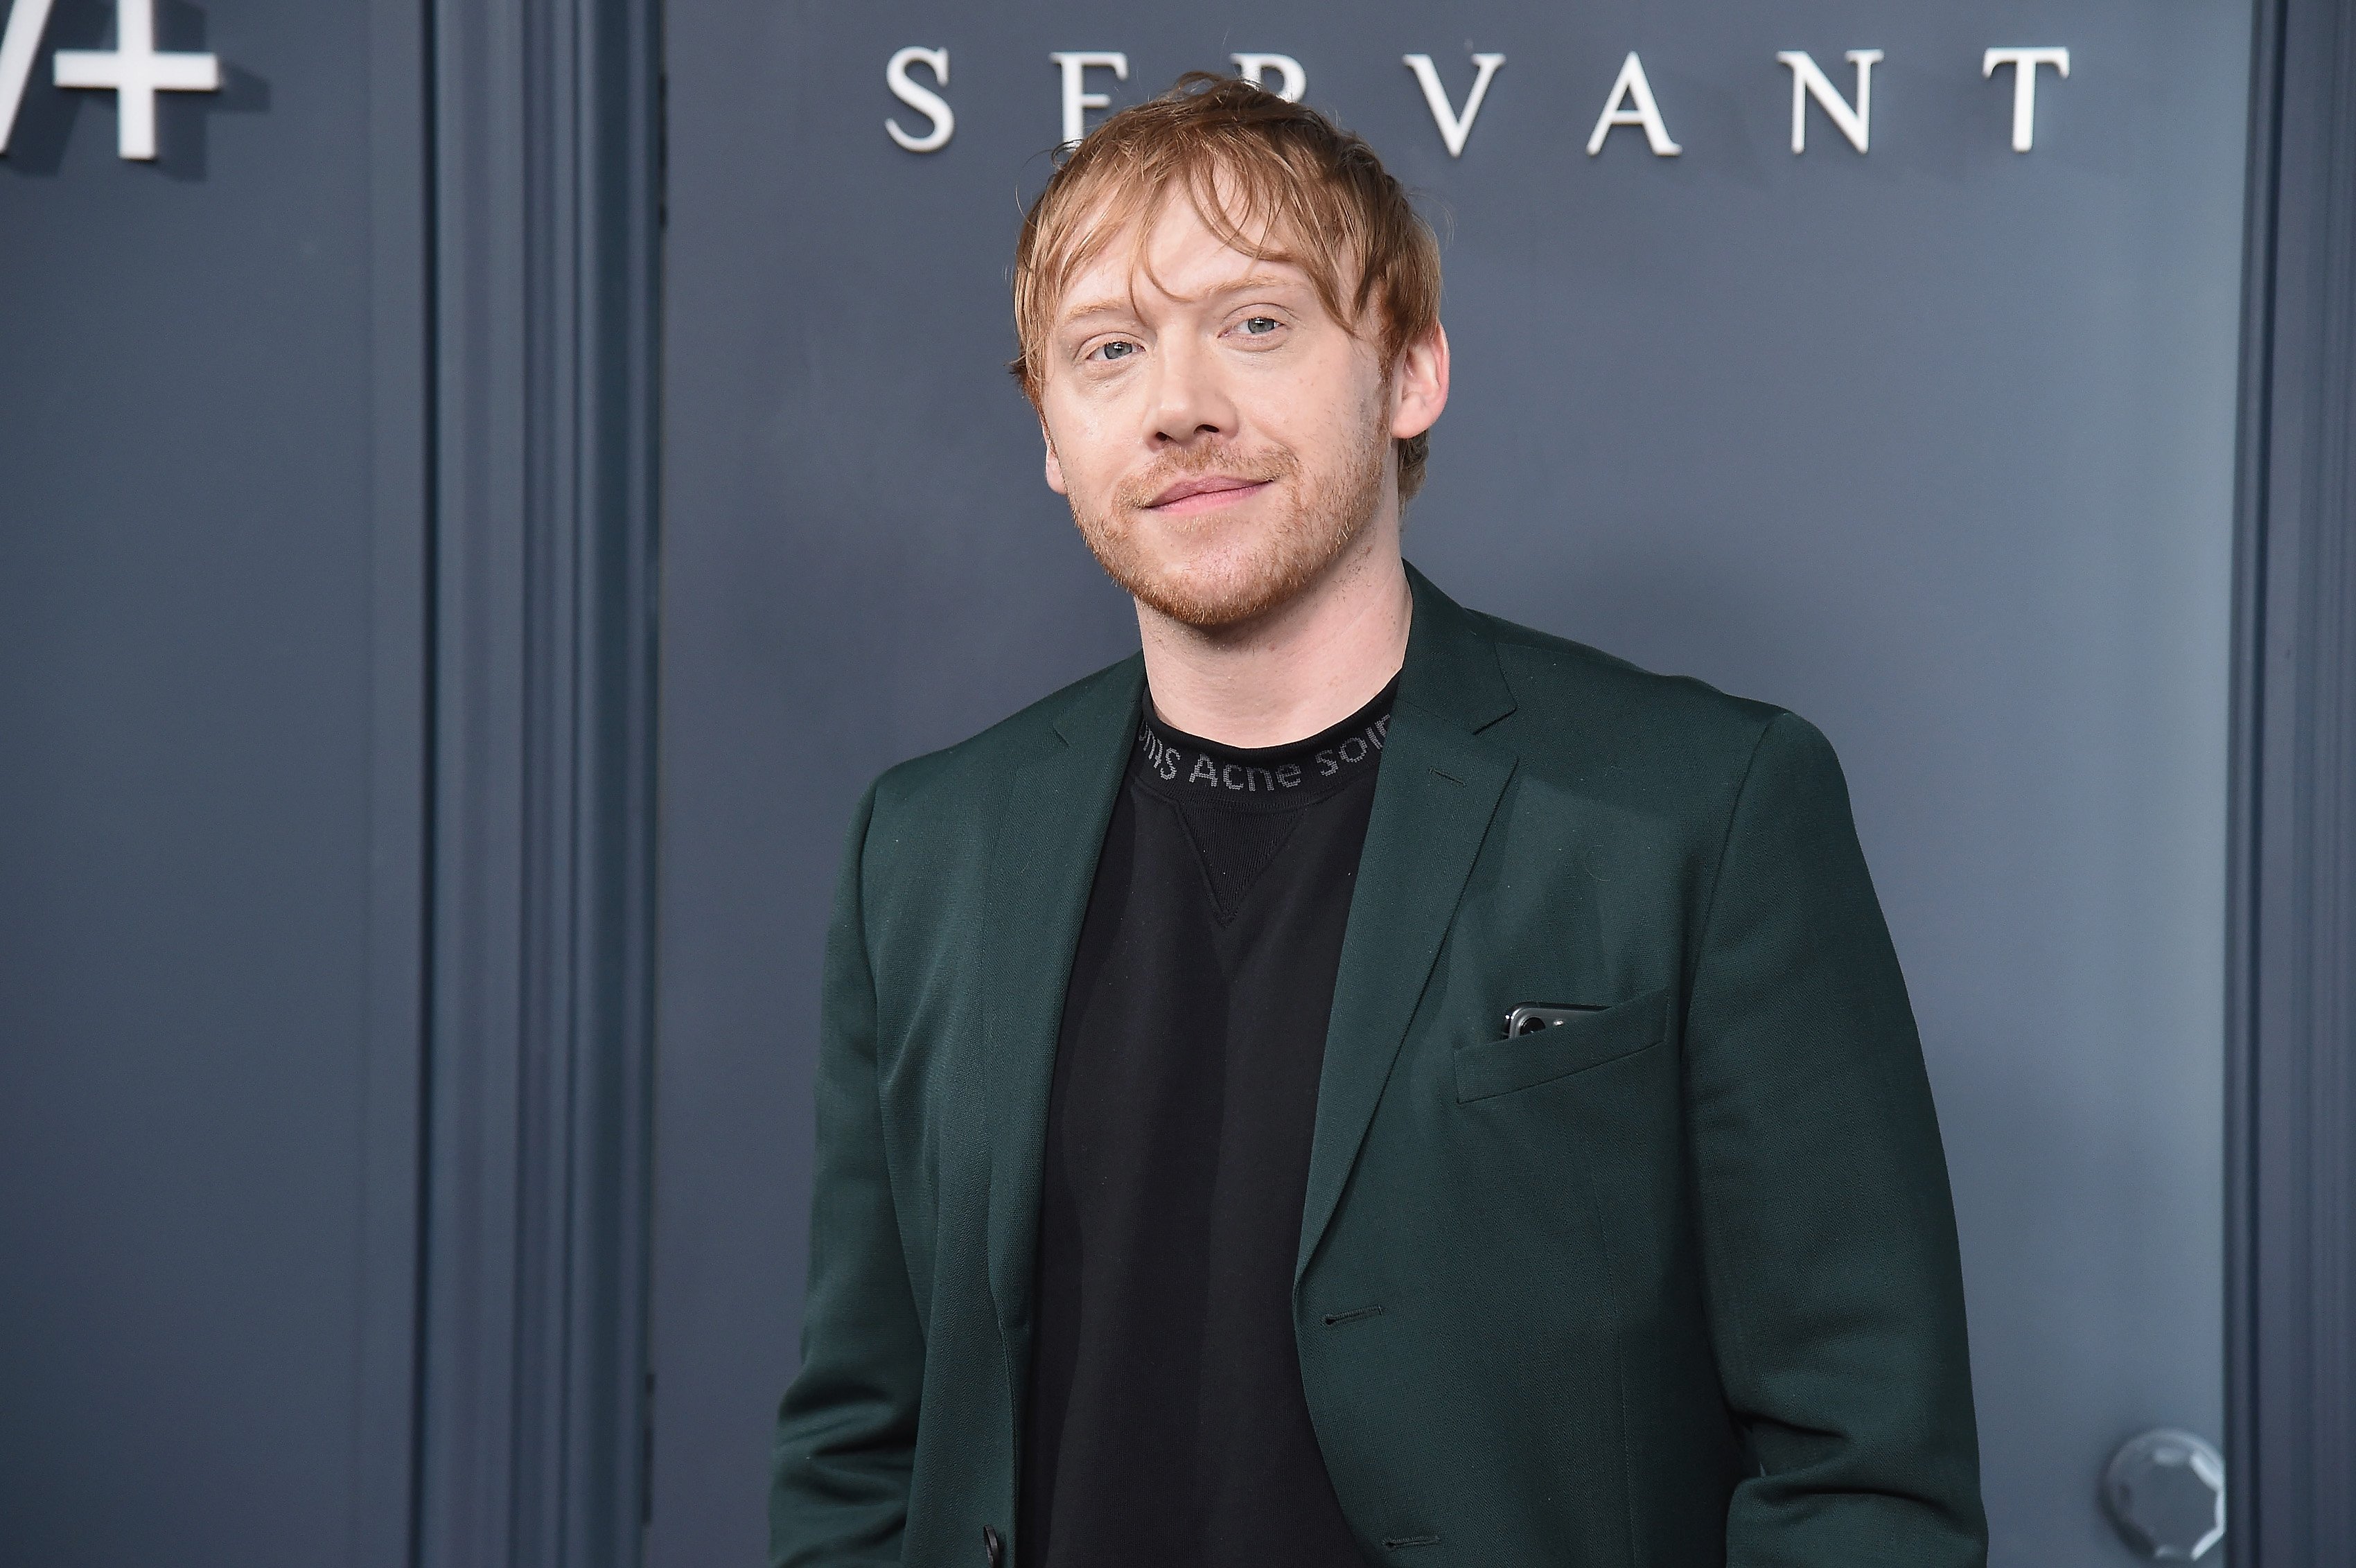 Rupert Grint attends Apple TV+'s "Servant" World Premiere on November 19, 2019, in New York City. | Source: Getty Images.